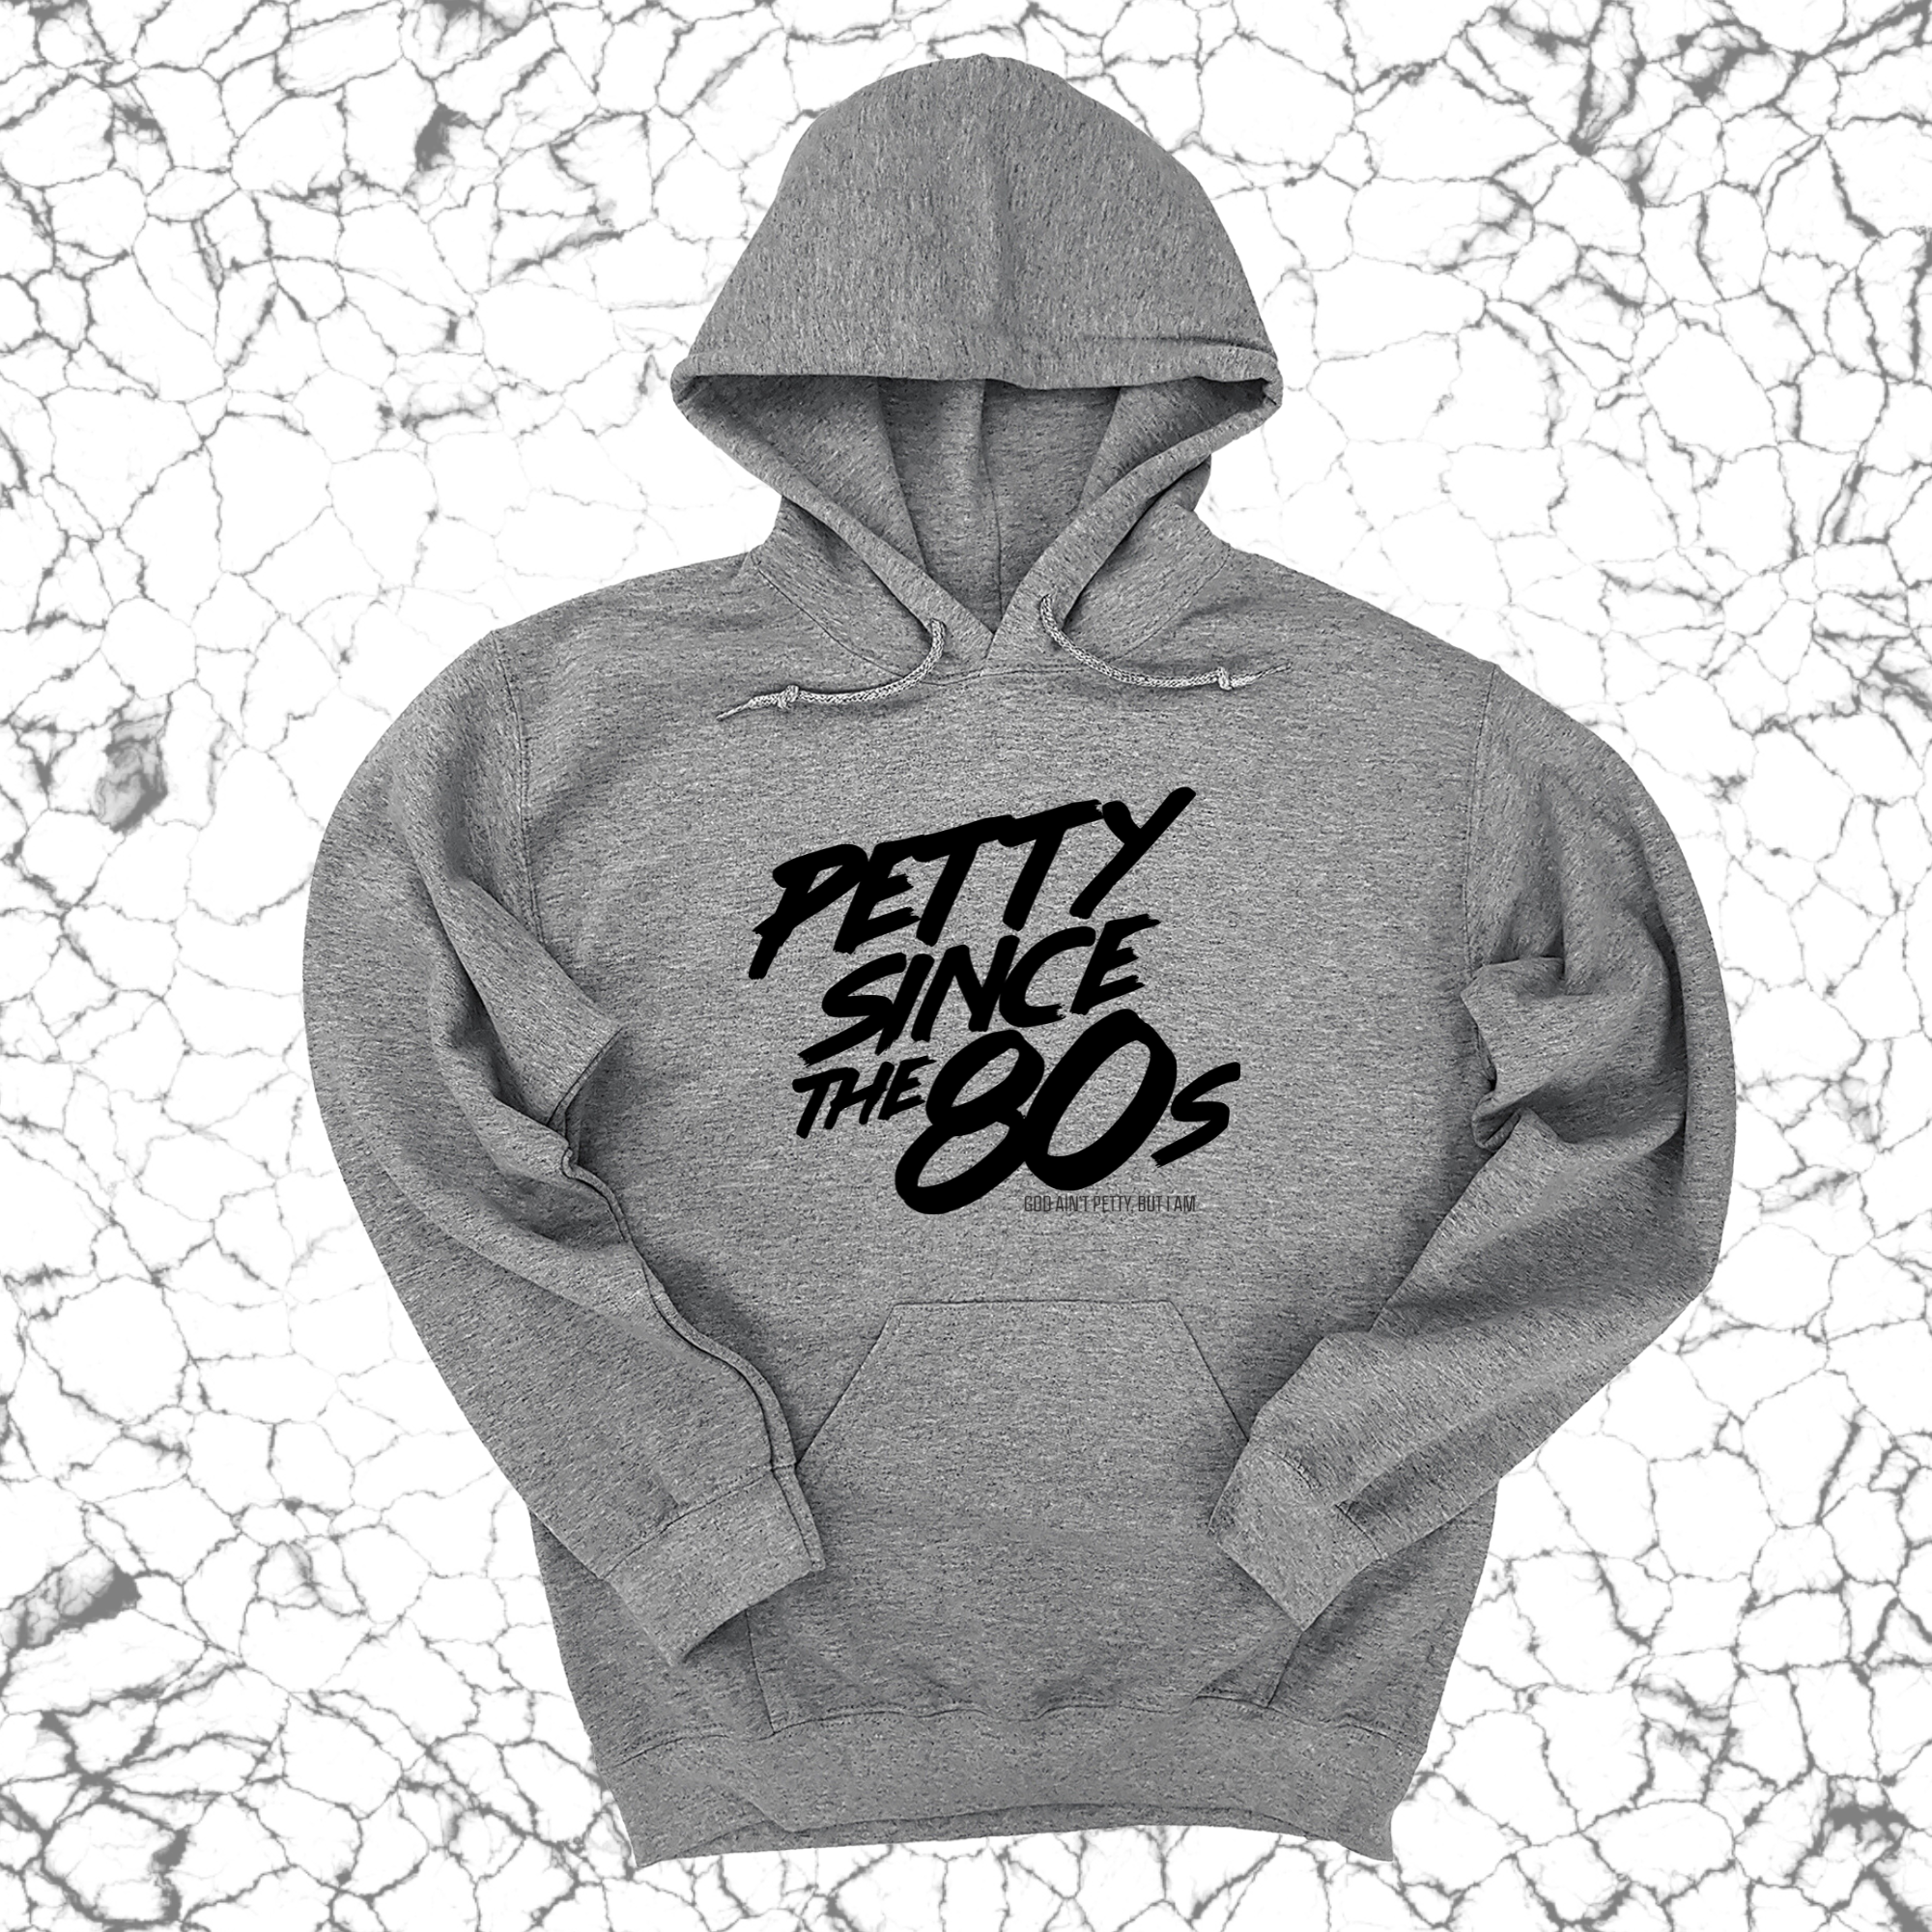 Petty Since the 80s Unisex Hoodie-Hoodie-The Original God Ain't Petty But I Am